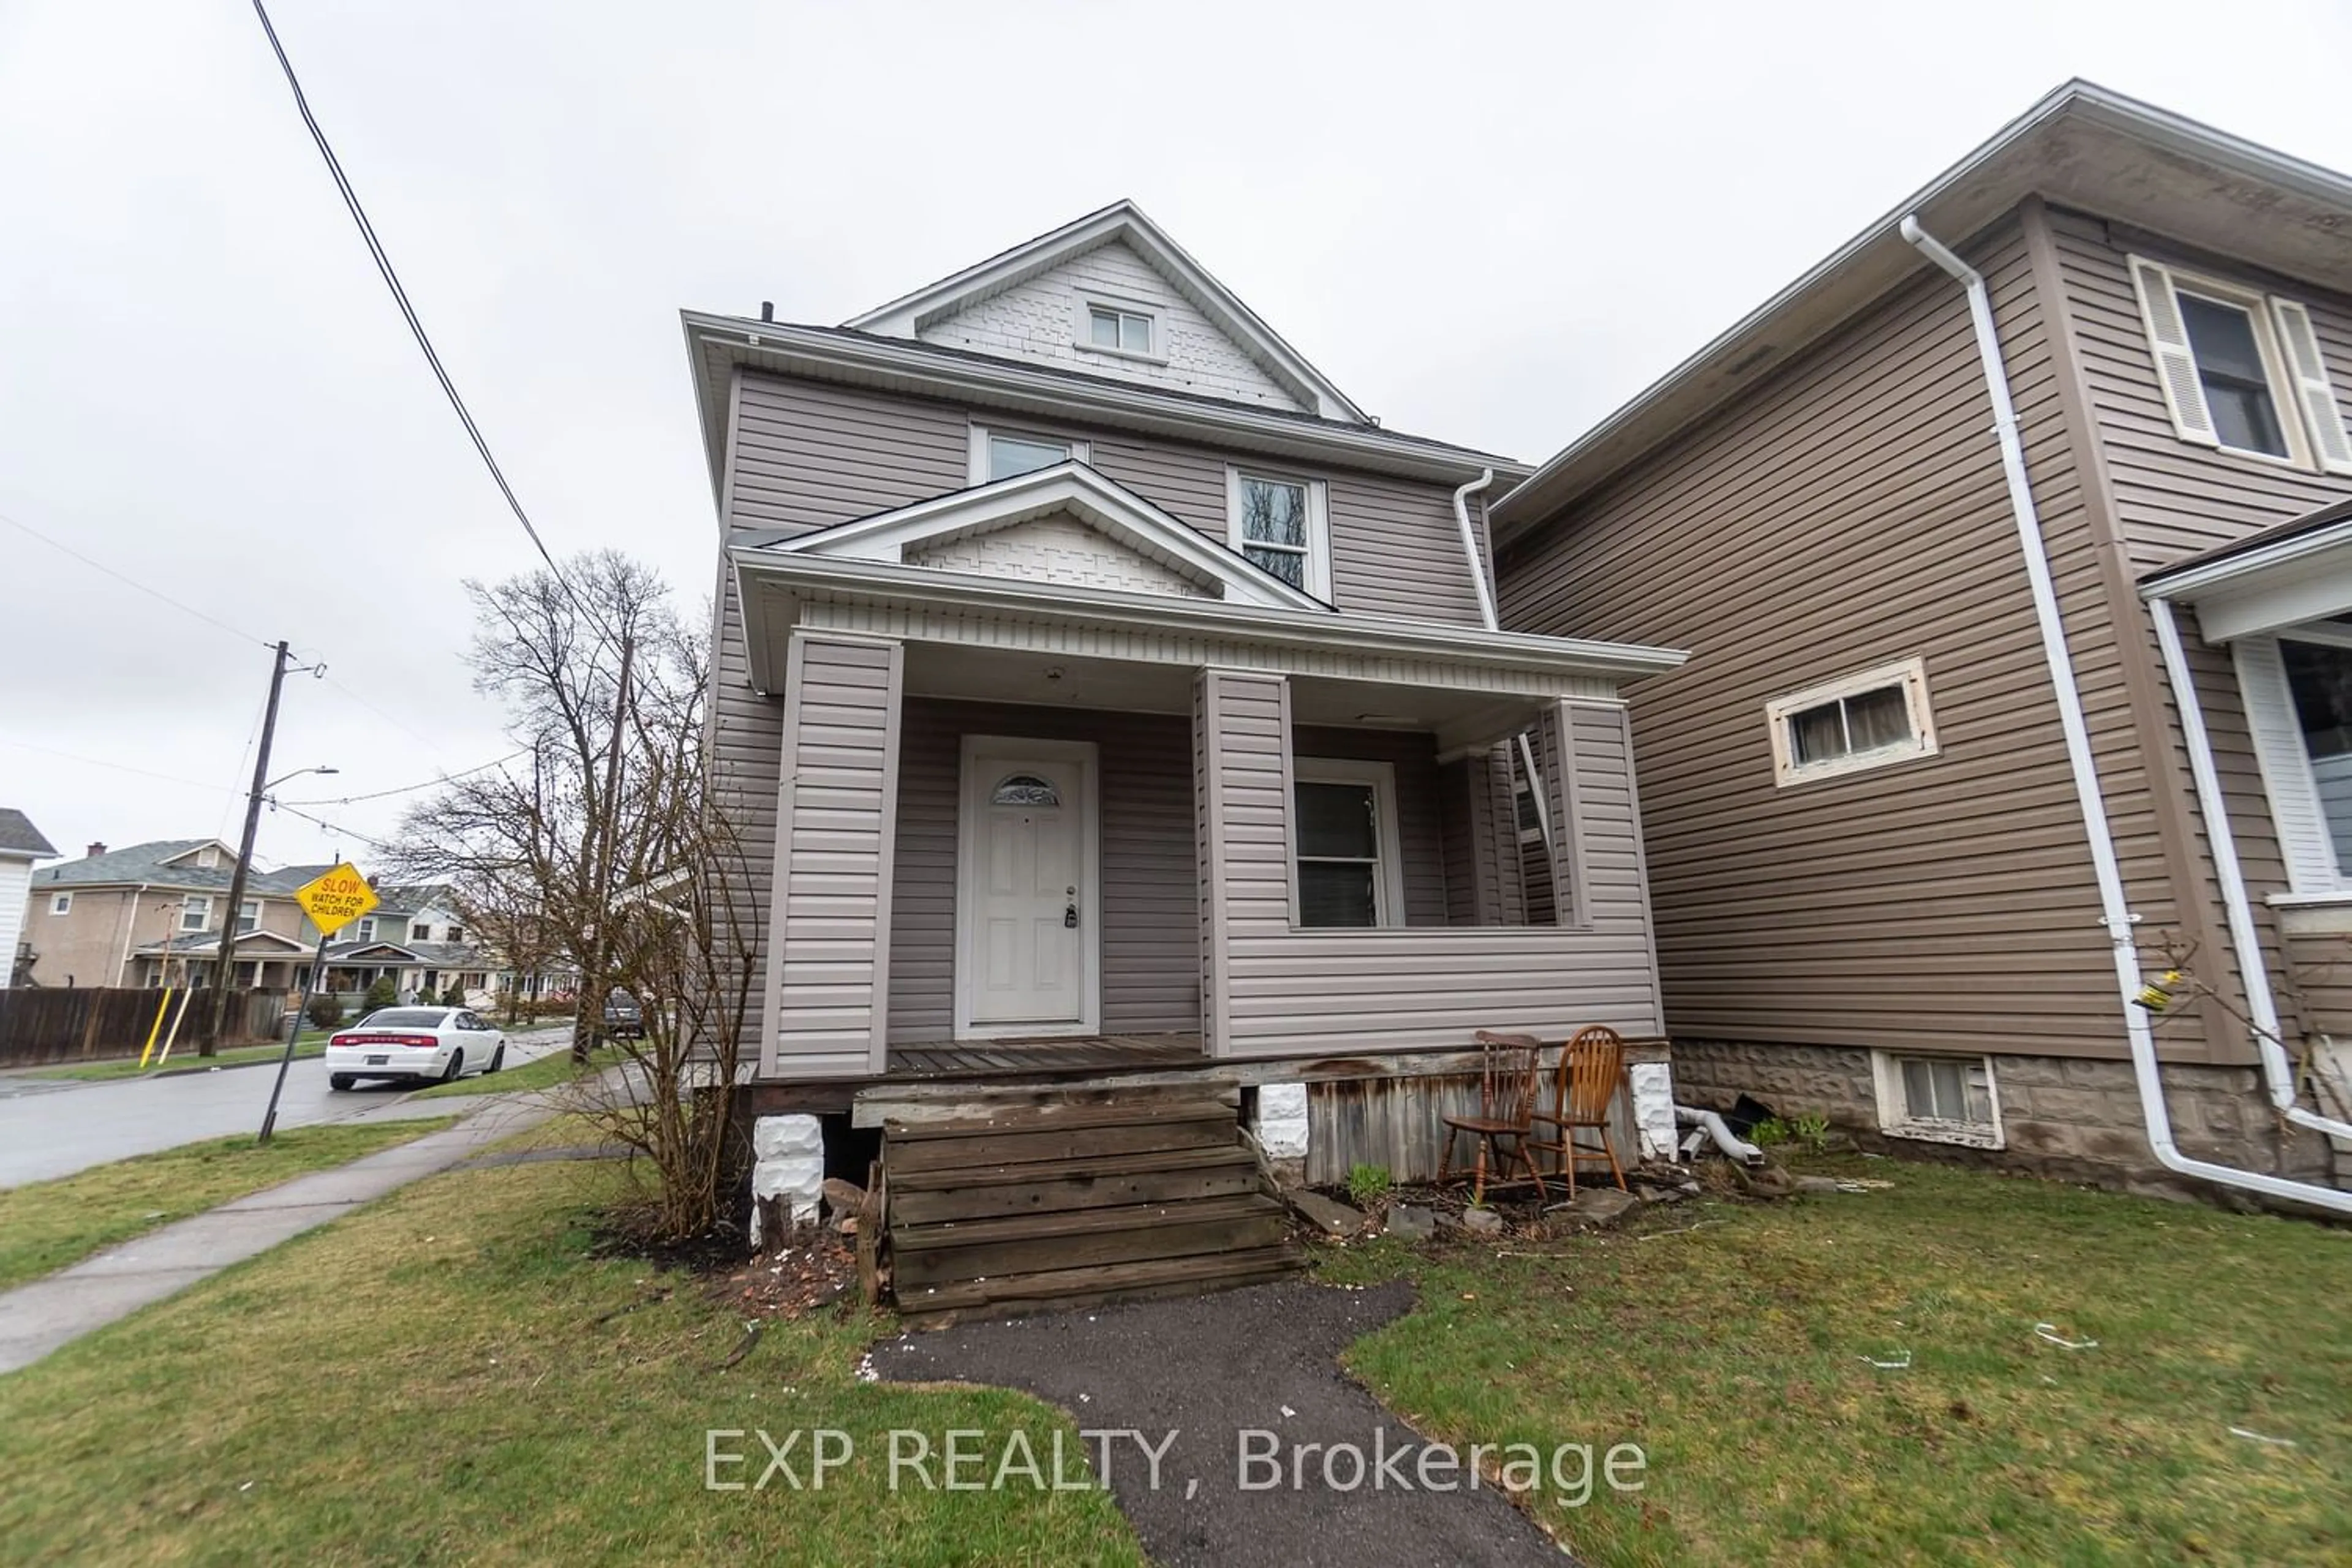 Frontside or backside of a home for 130 York St, St. Catharines Ontario L2R 6E4